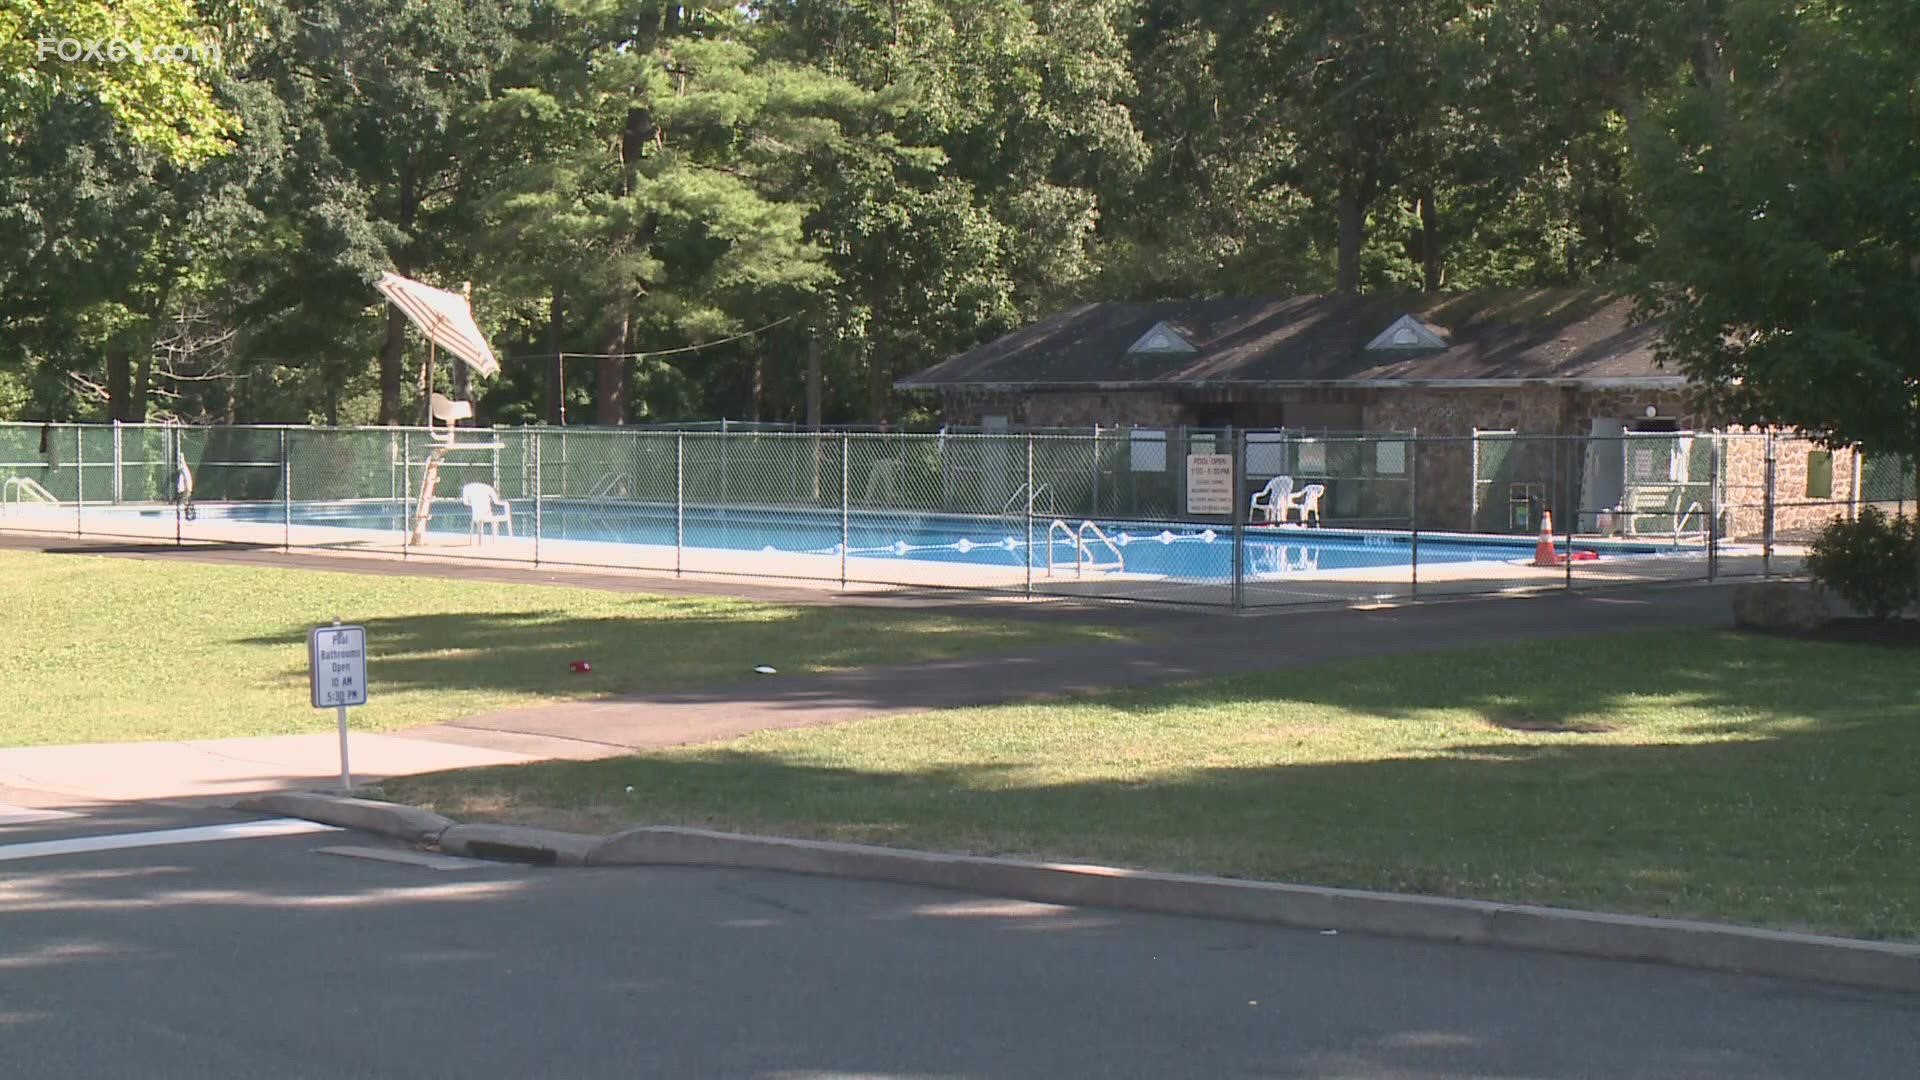 The pool at Hubbard Park will remain closed until August 8 due to the incident.